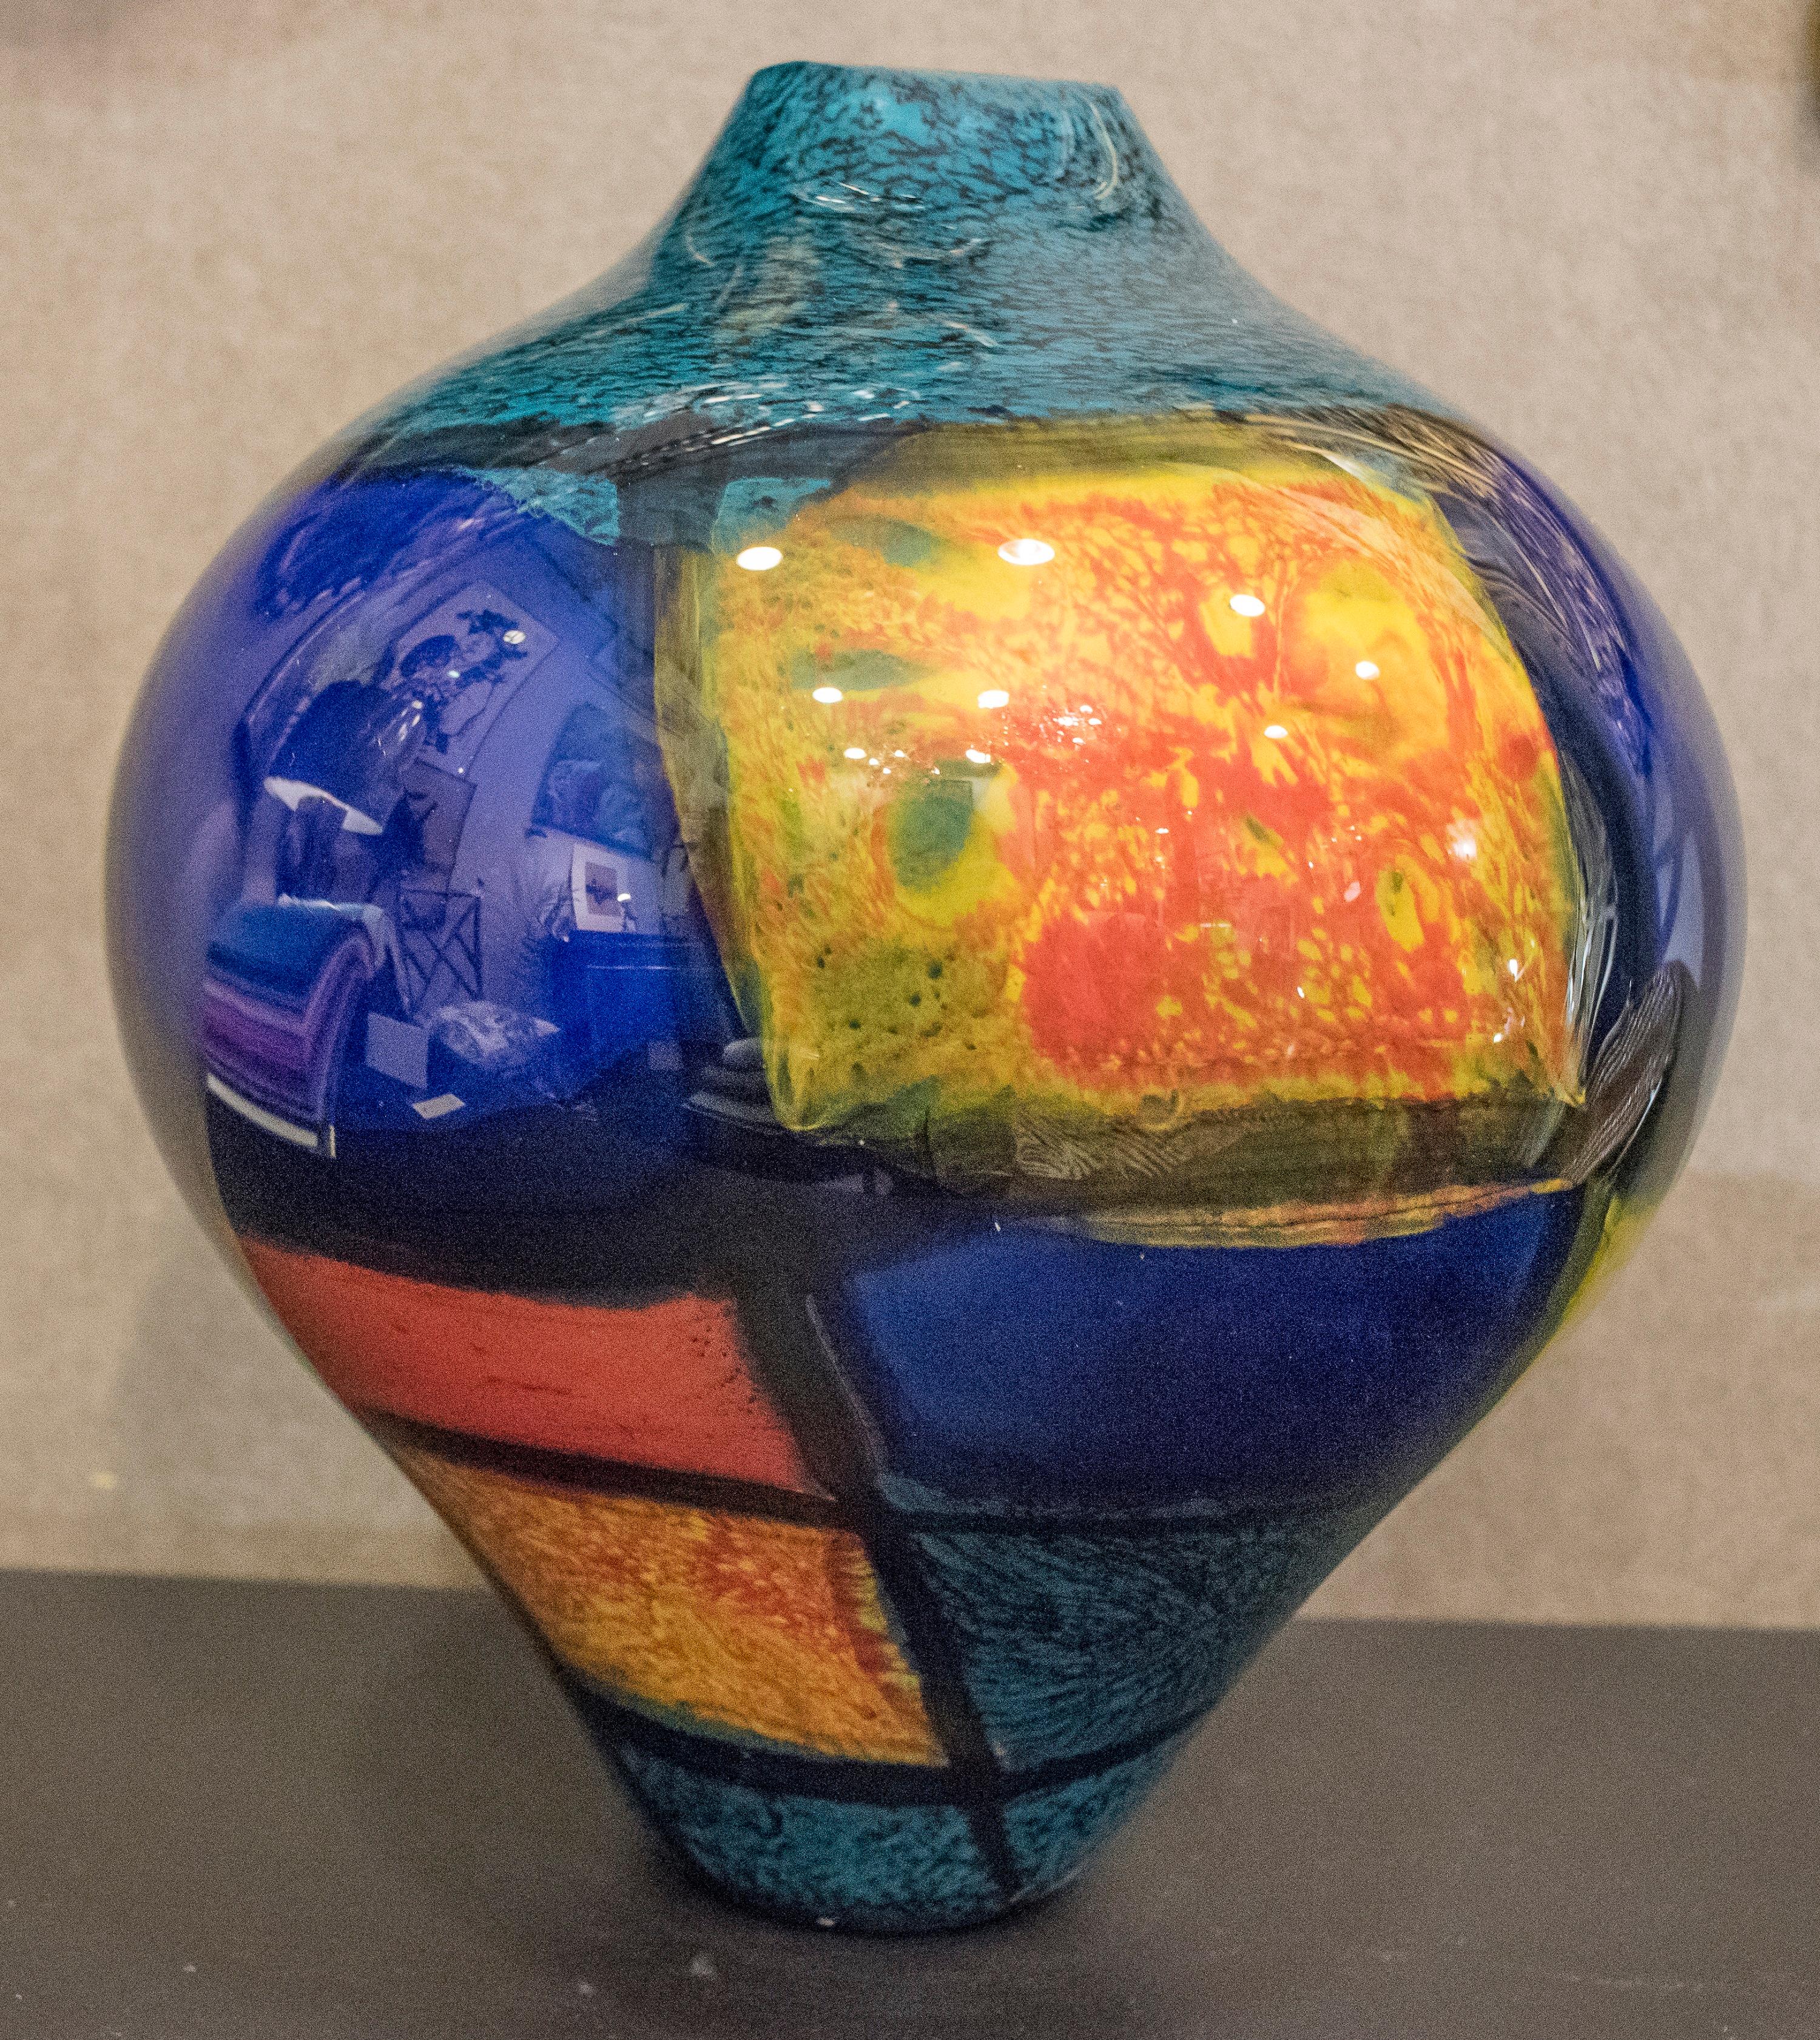 Hand blown glass by Ioan Nemtoi, its a bright blue, yellow and splashes of greens and reds.
The vase is unconventionally and amazing shape.
Ioan Nemtoi was born in 1968 in North- Eastern Romania, with a height and brilliant talent, he studied at